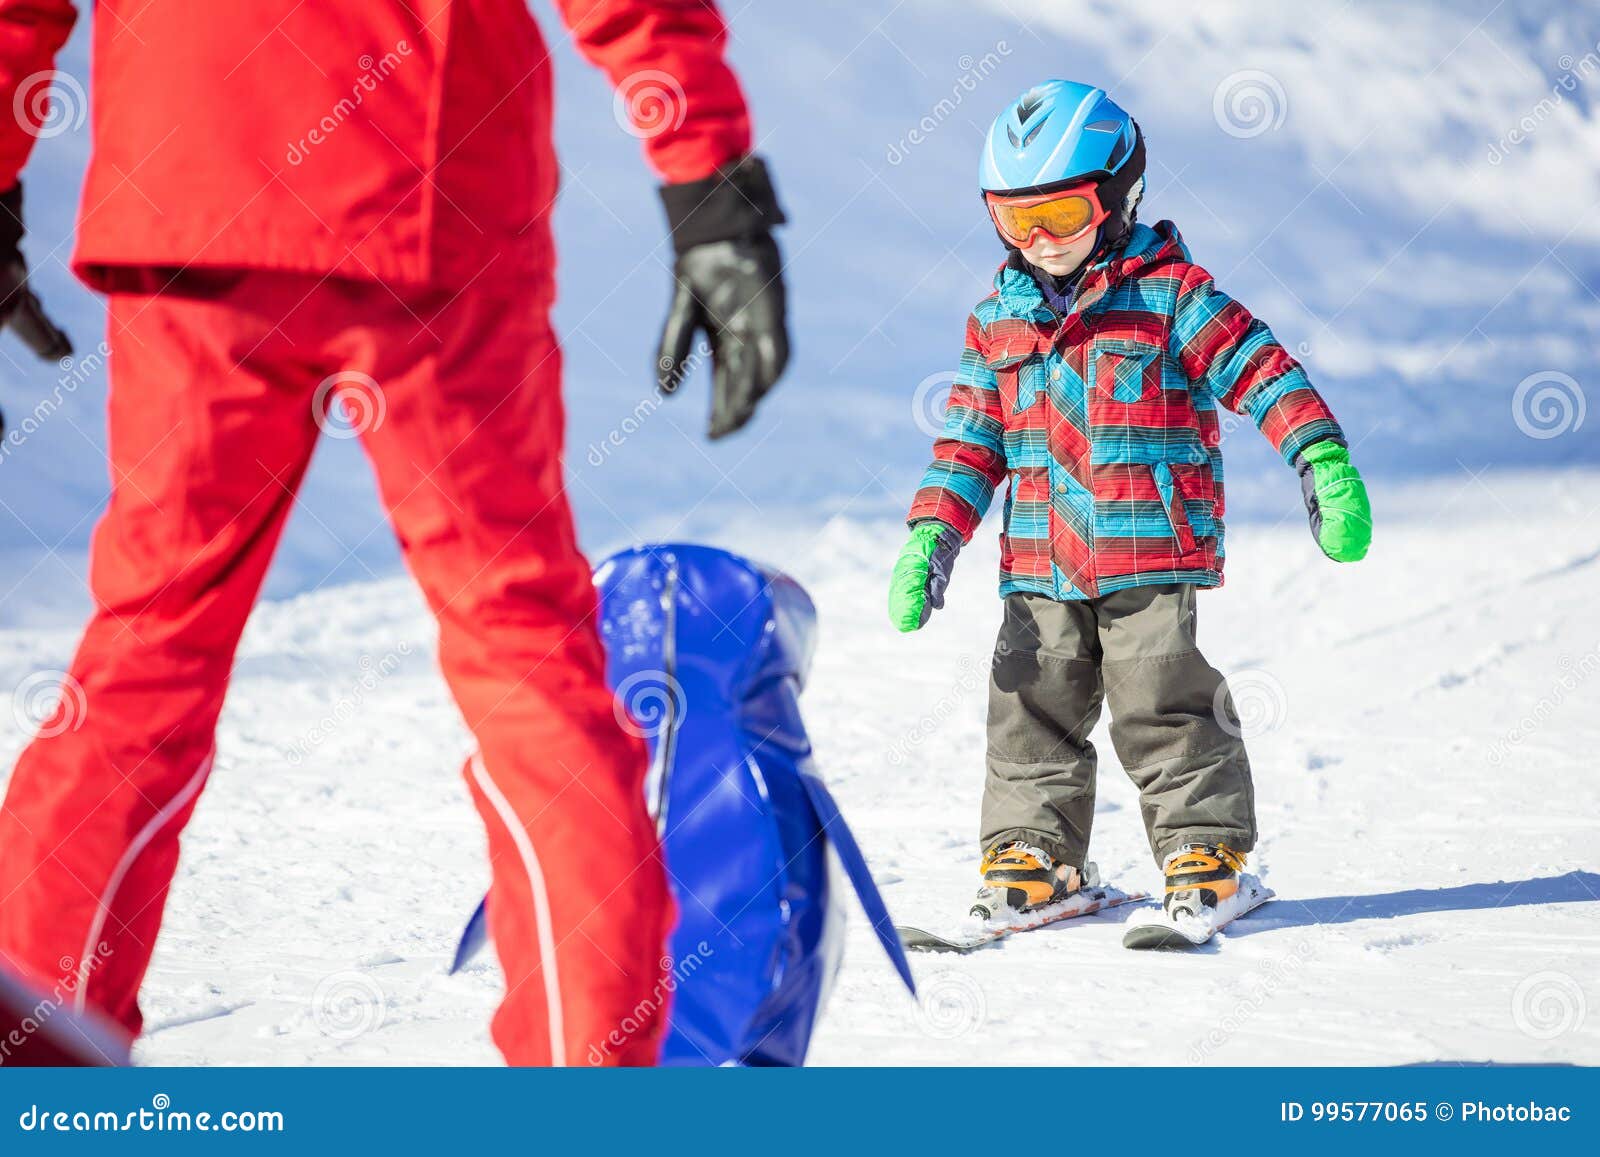 young skier sliding down towards towards toy penguin and ski ins